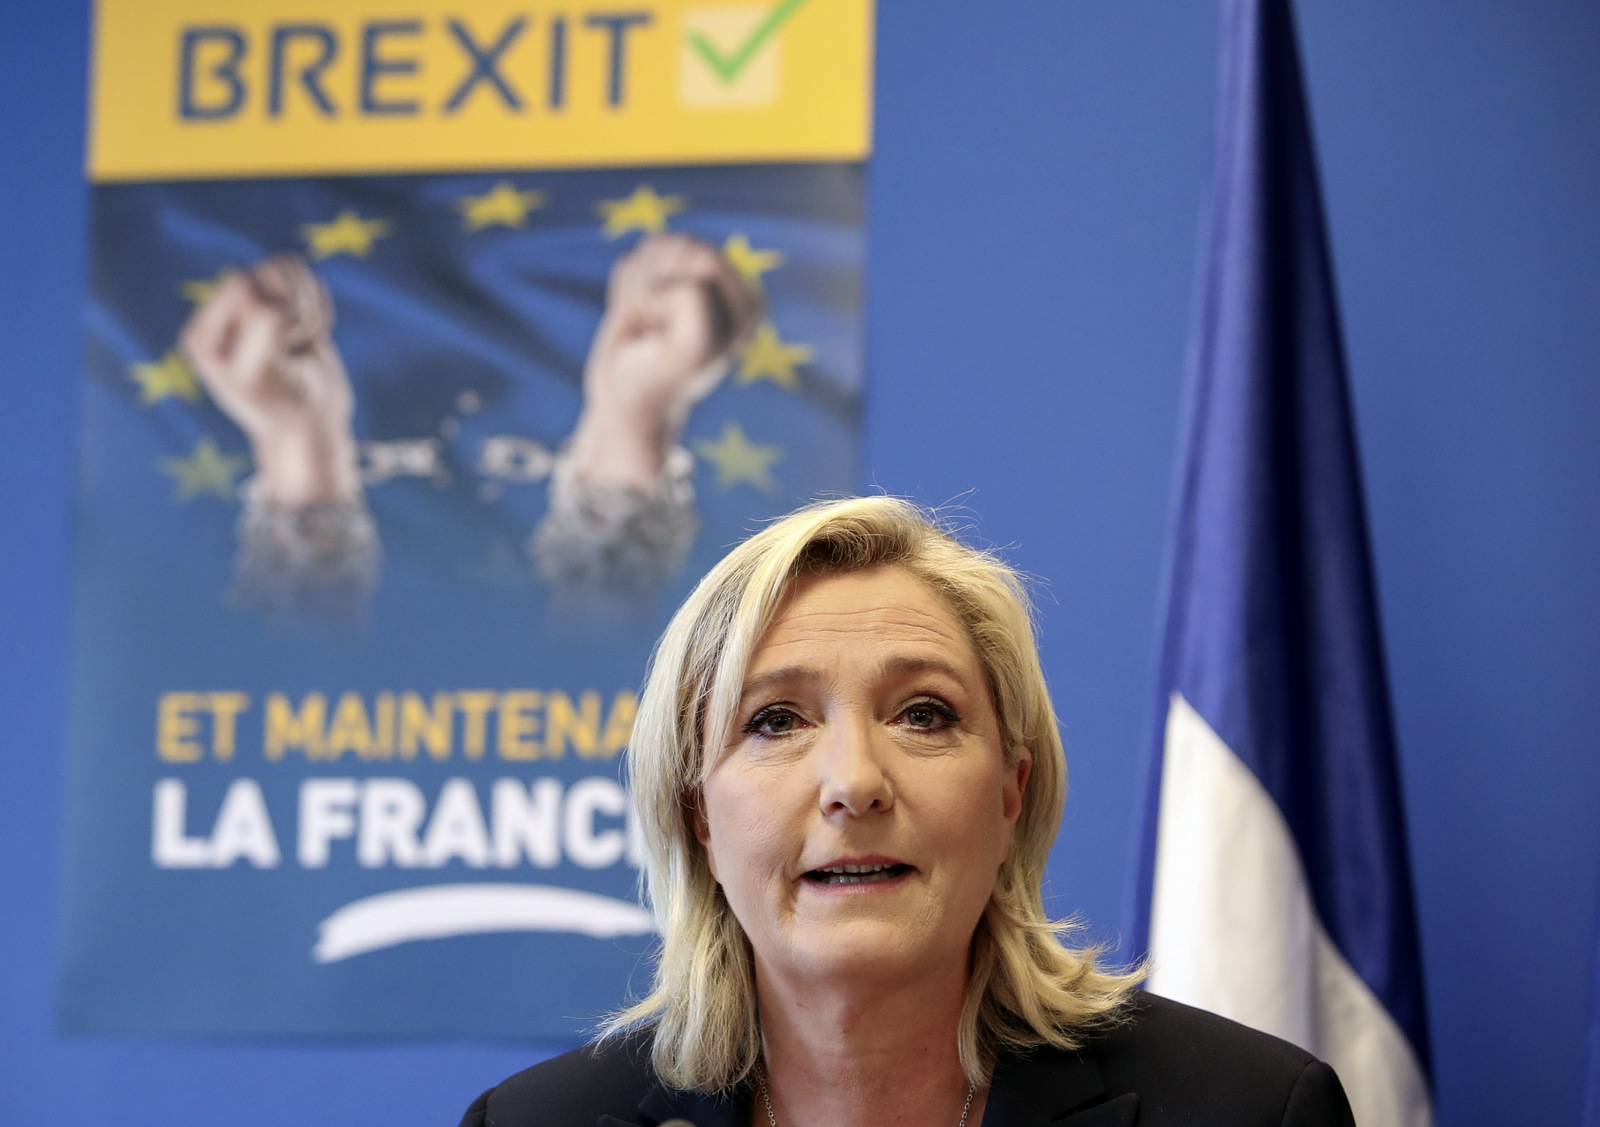 French far-right leader Marine Le Pen speaks during a press conference at the National Front party headquarters in Nanterre, outside Paris, Friday, June 24, 2016. (AP/Kamil Zihnioglu)